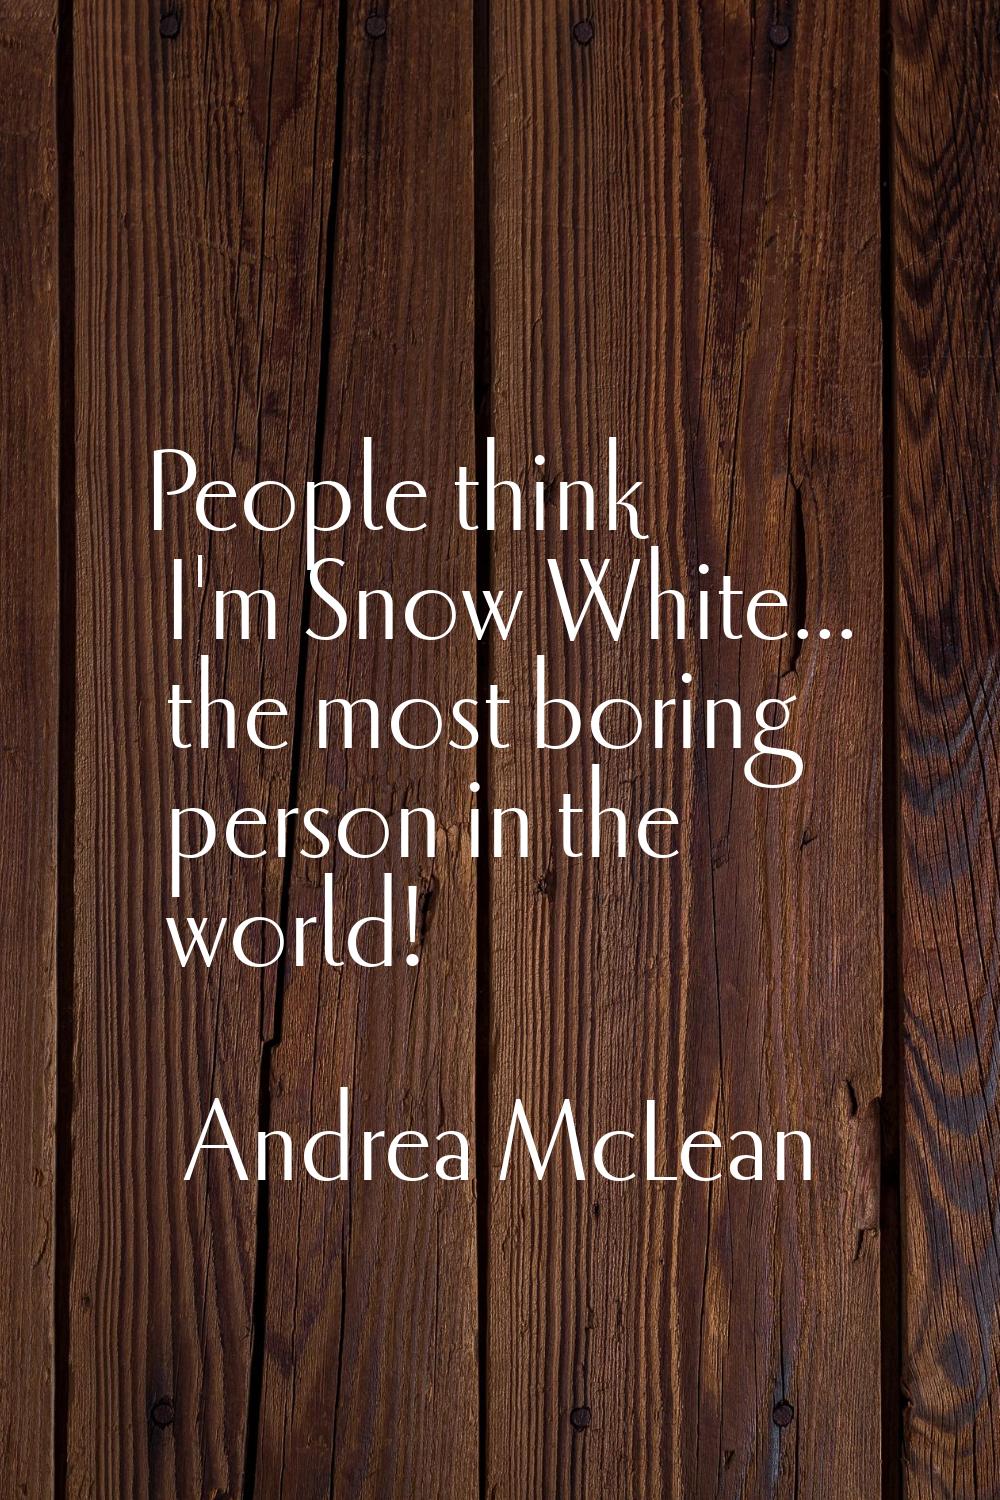 People think I'm Snow White... the most boring person in the world!